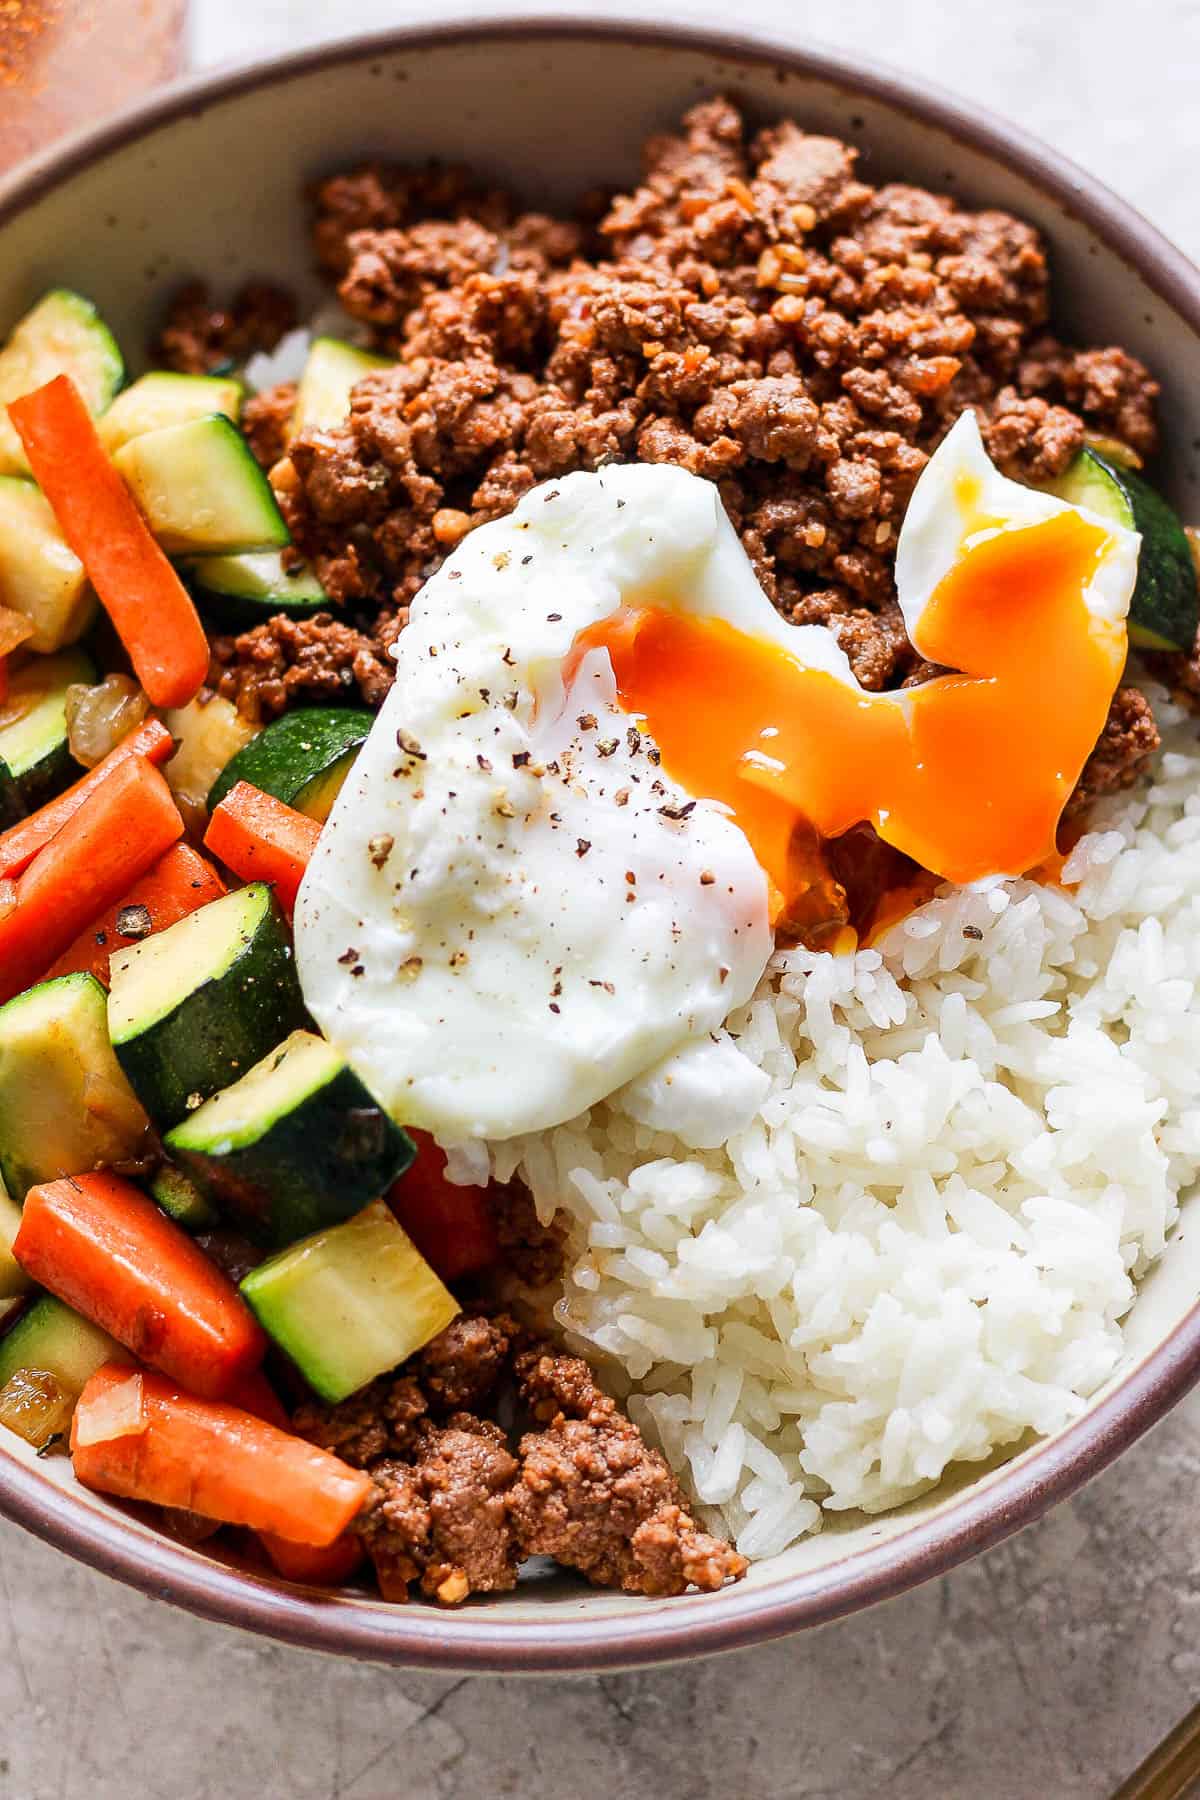 A ground beef bowl with a soft boiled egg on top.